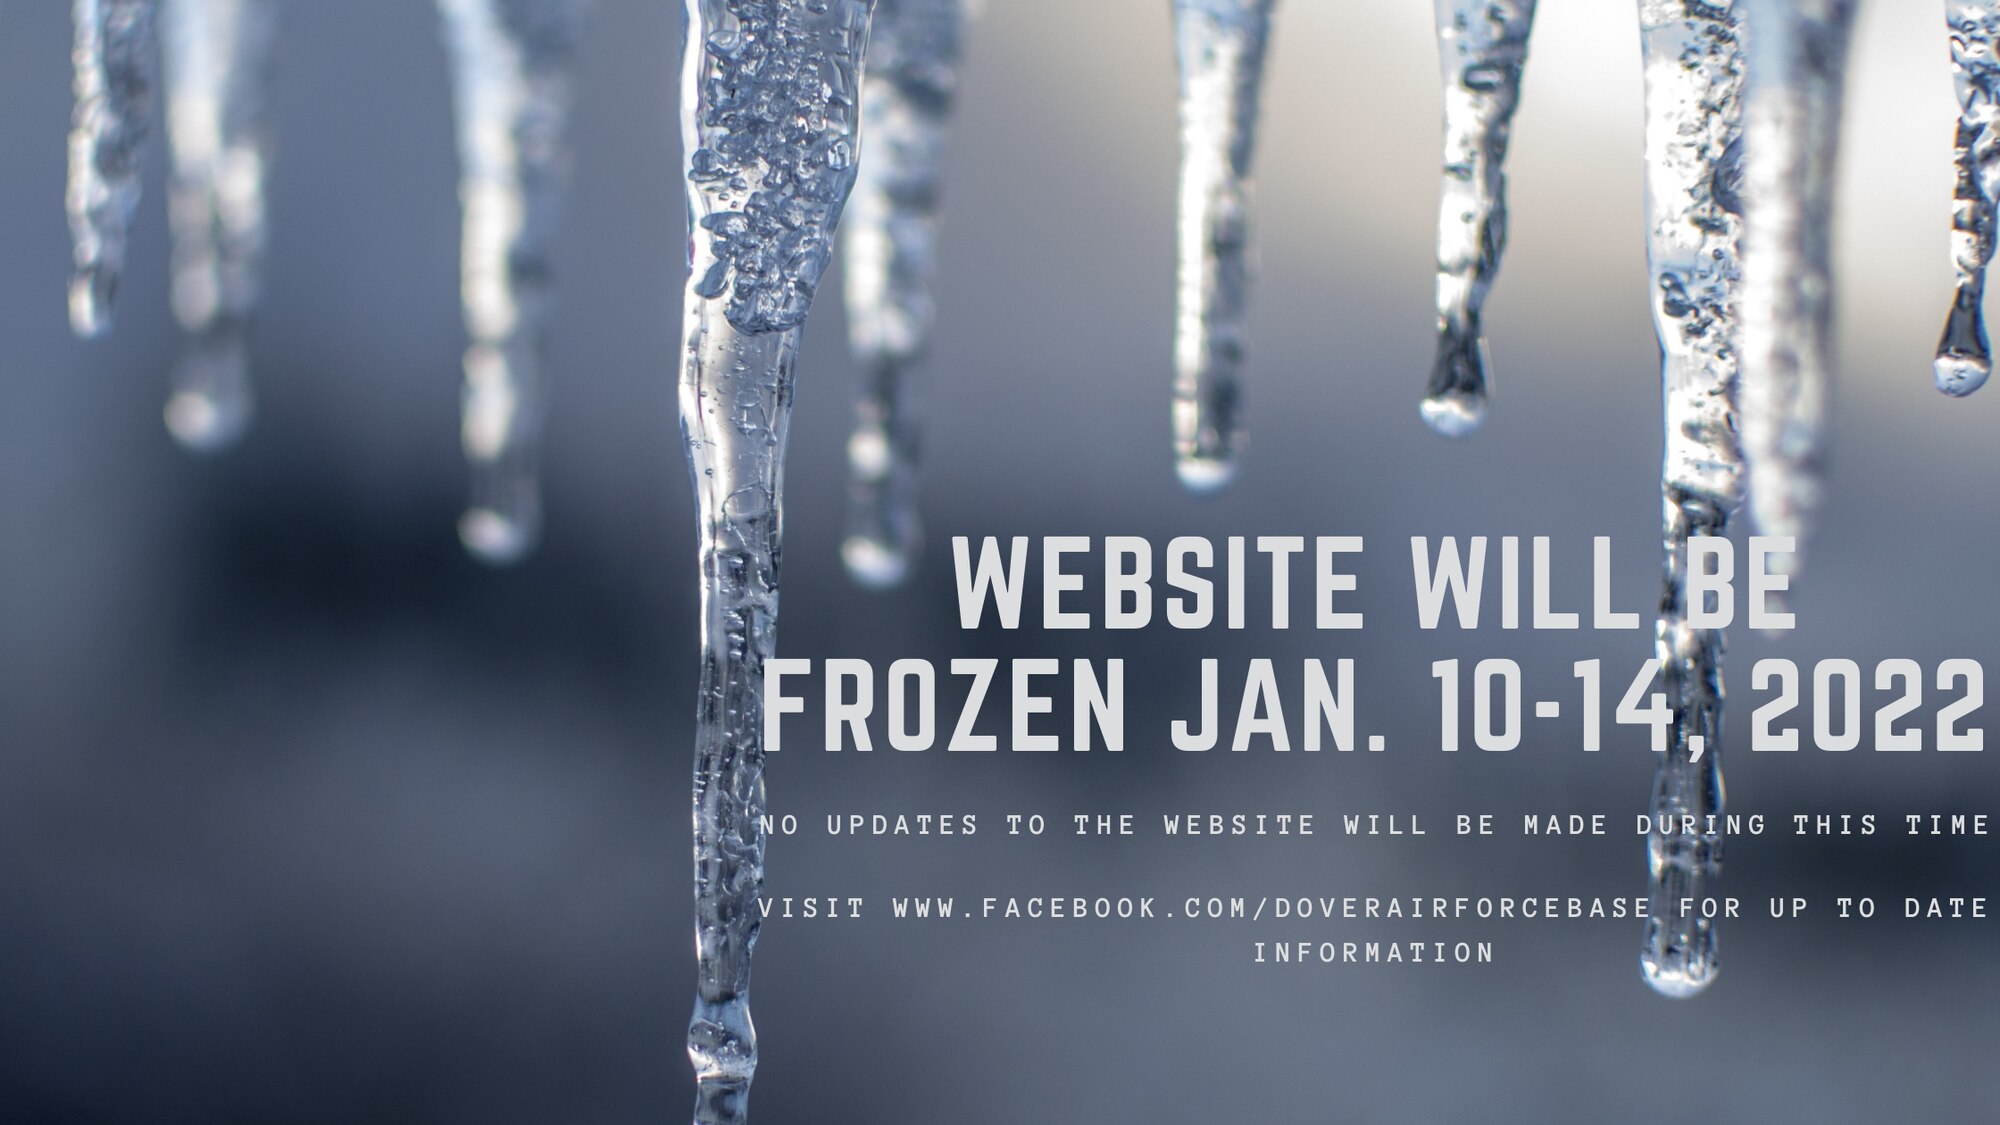 This website will be frozen, Jan. 10-14, 2022. No updates to the site will be made during this time. For up to date information, please visit www.facebook.com/doverairforcebase.